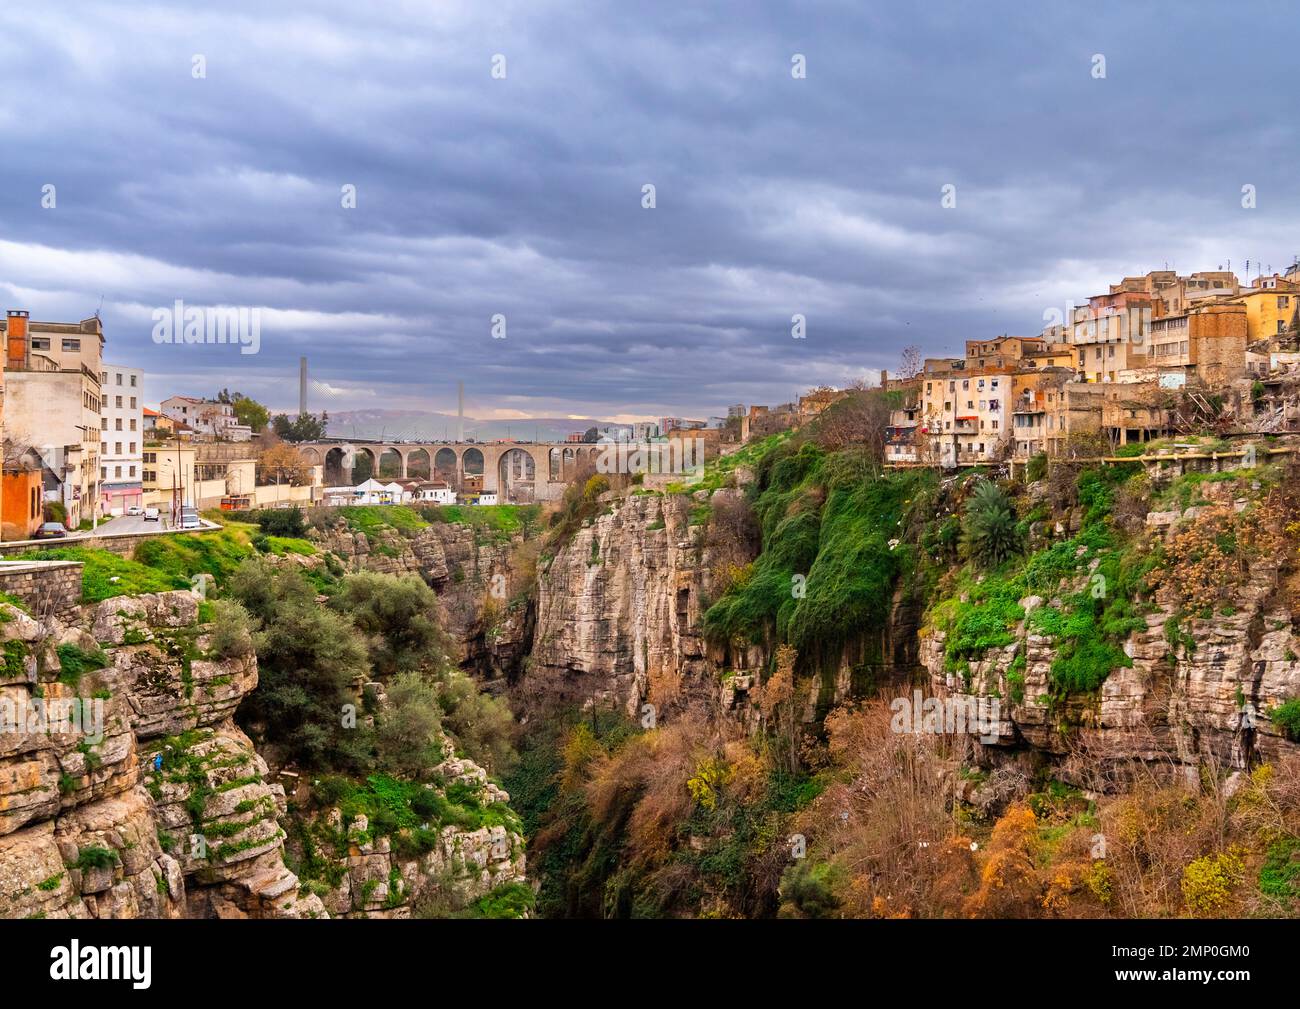 Old houses overlooking the canyon, North Africa, Constantine, Algeria Stock Photo